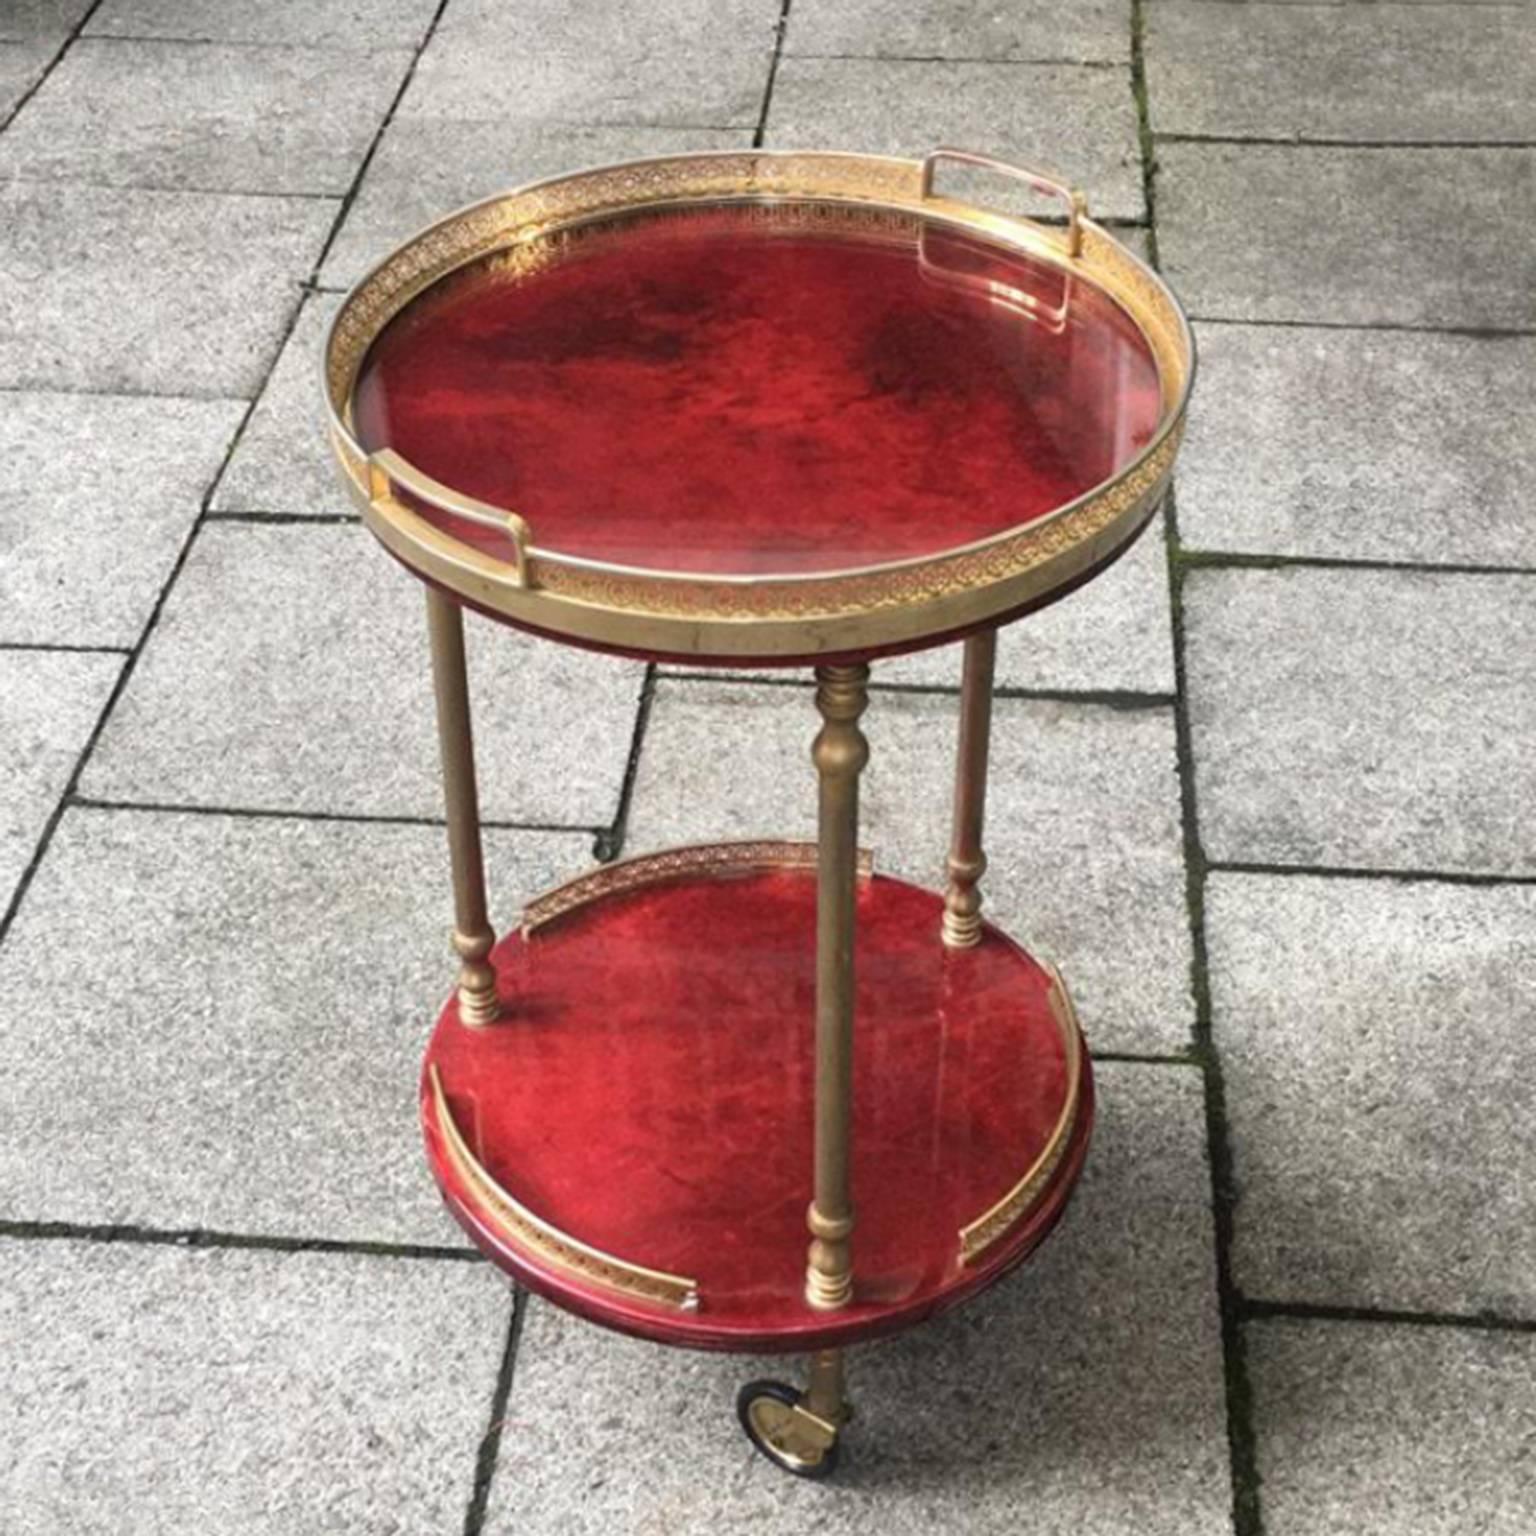 Fine bar or serving cart by Aldo Tura Milan, Italy 1960s.
The bar cart is made of red lacquered goatskin and polished brass with a removable top glass tray.
Measure: H 44.5 x D 33.5 cm.